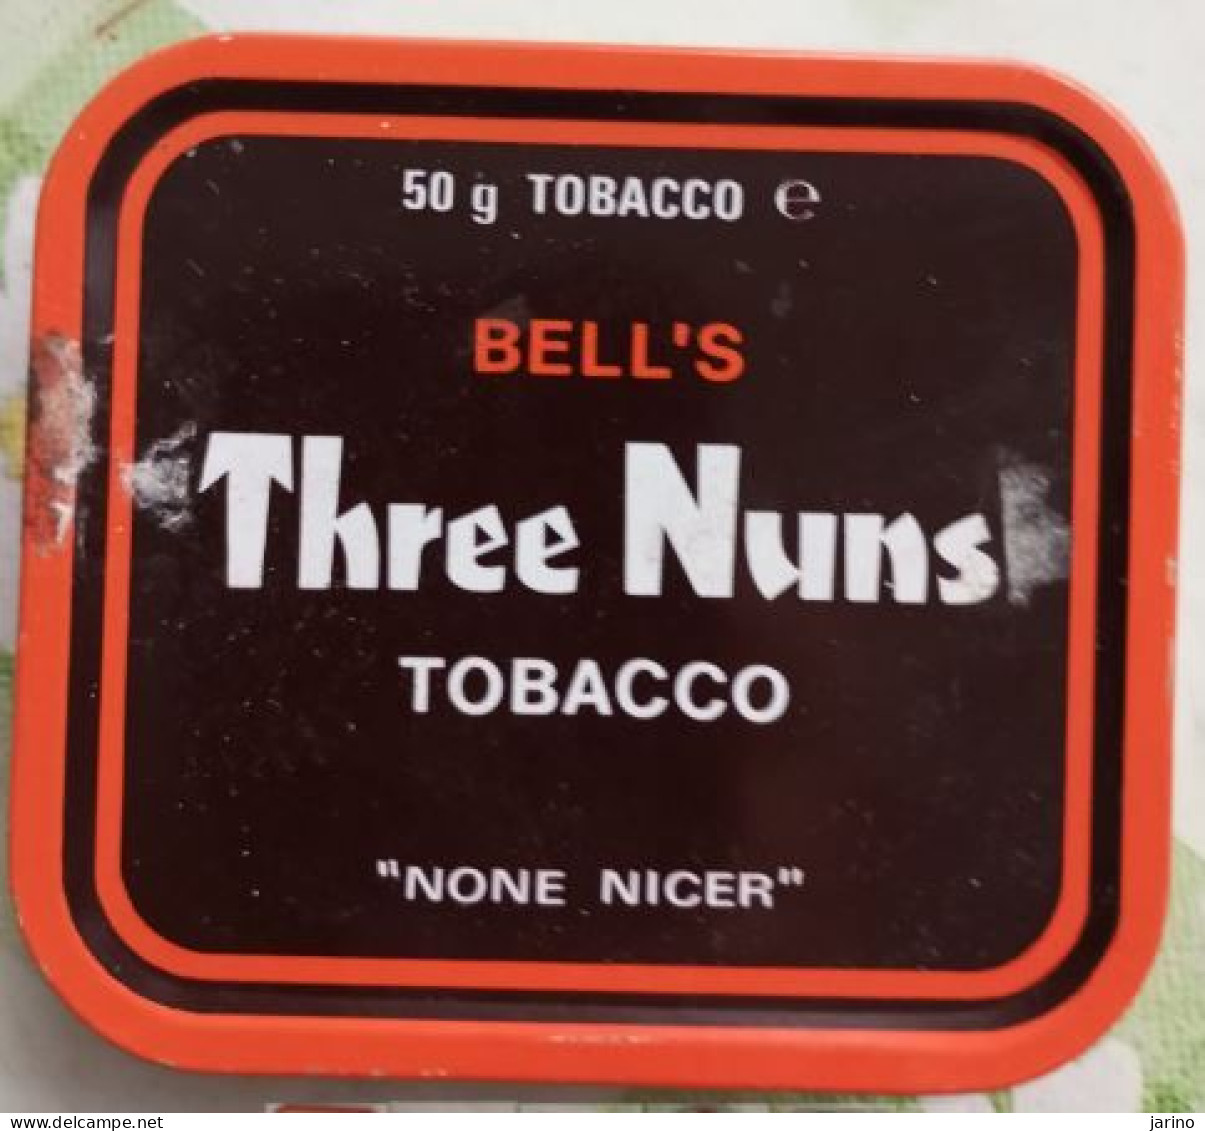 Ancient Empty Metal Tobacco Box BELL'S Three Nuns Tobacco, "None Nicer", Made In England, 10 X 8 X 3 Cm - Empty Tobacco Boxes